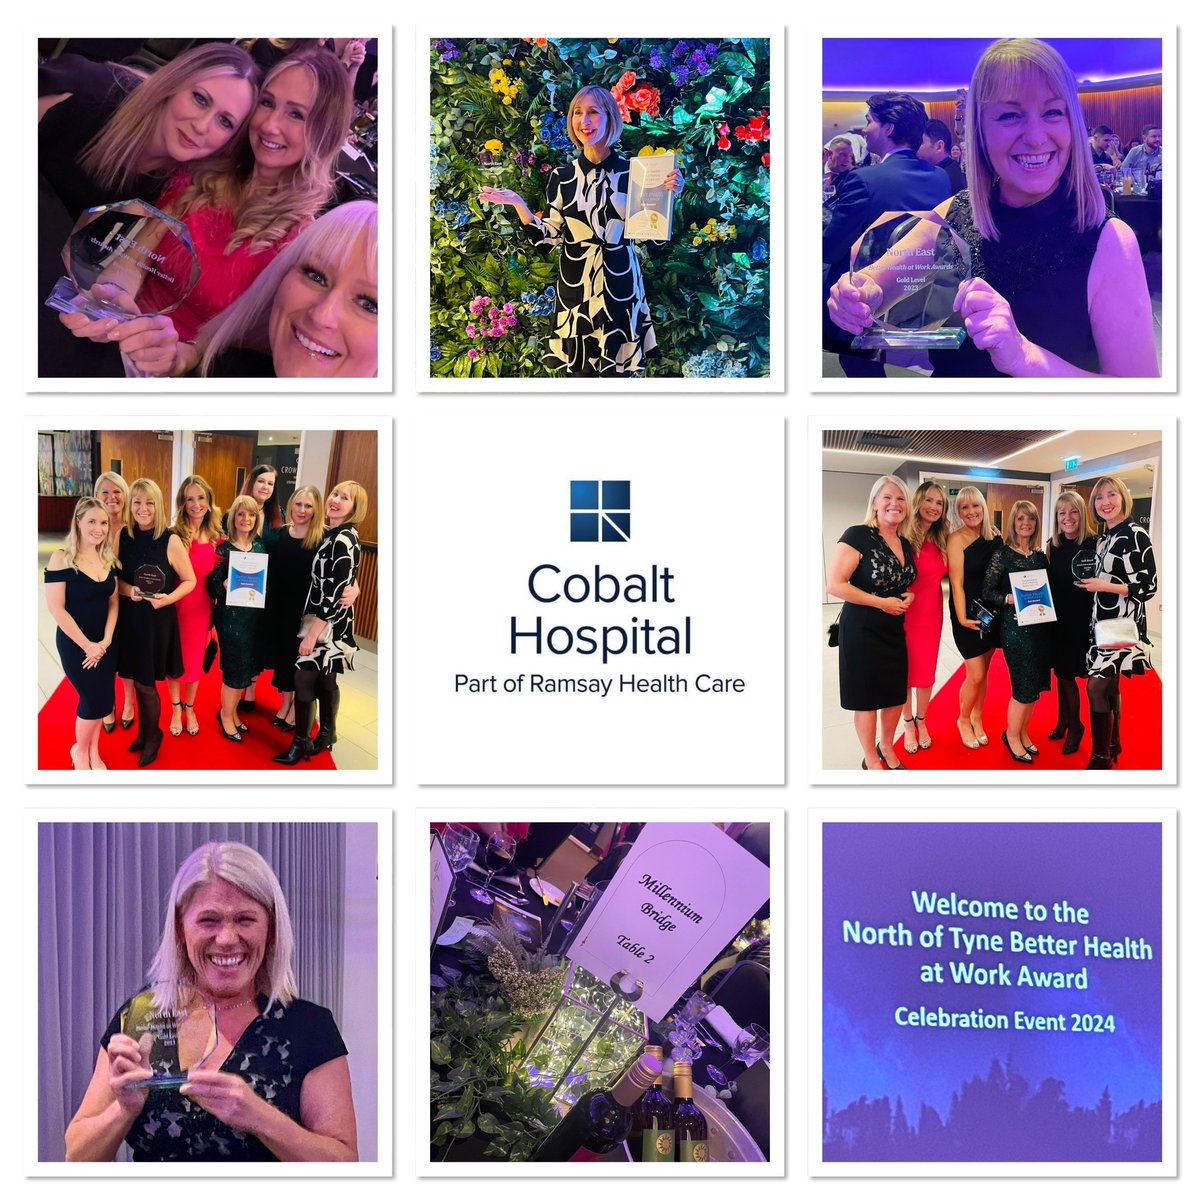 Congratulations to Cobalt Hospital for attending the ‘Better Health at Work Awards’ and achieving an incredible GOLD✨ award. This programme supports and recognises the efforts of employers promoting a healthy work environment. Read the full story here: ow.ly/wbfl50R8gO7